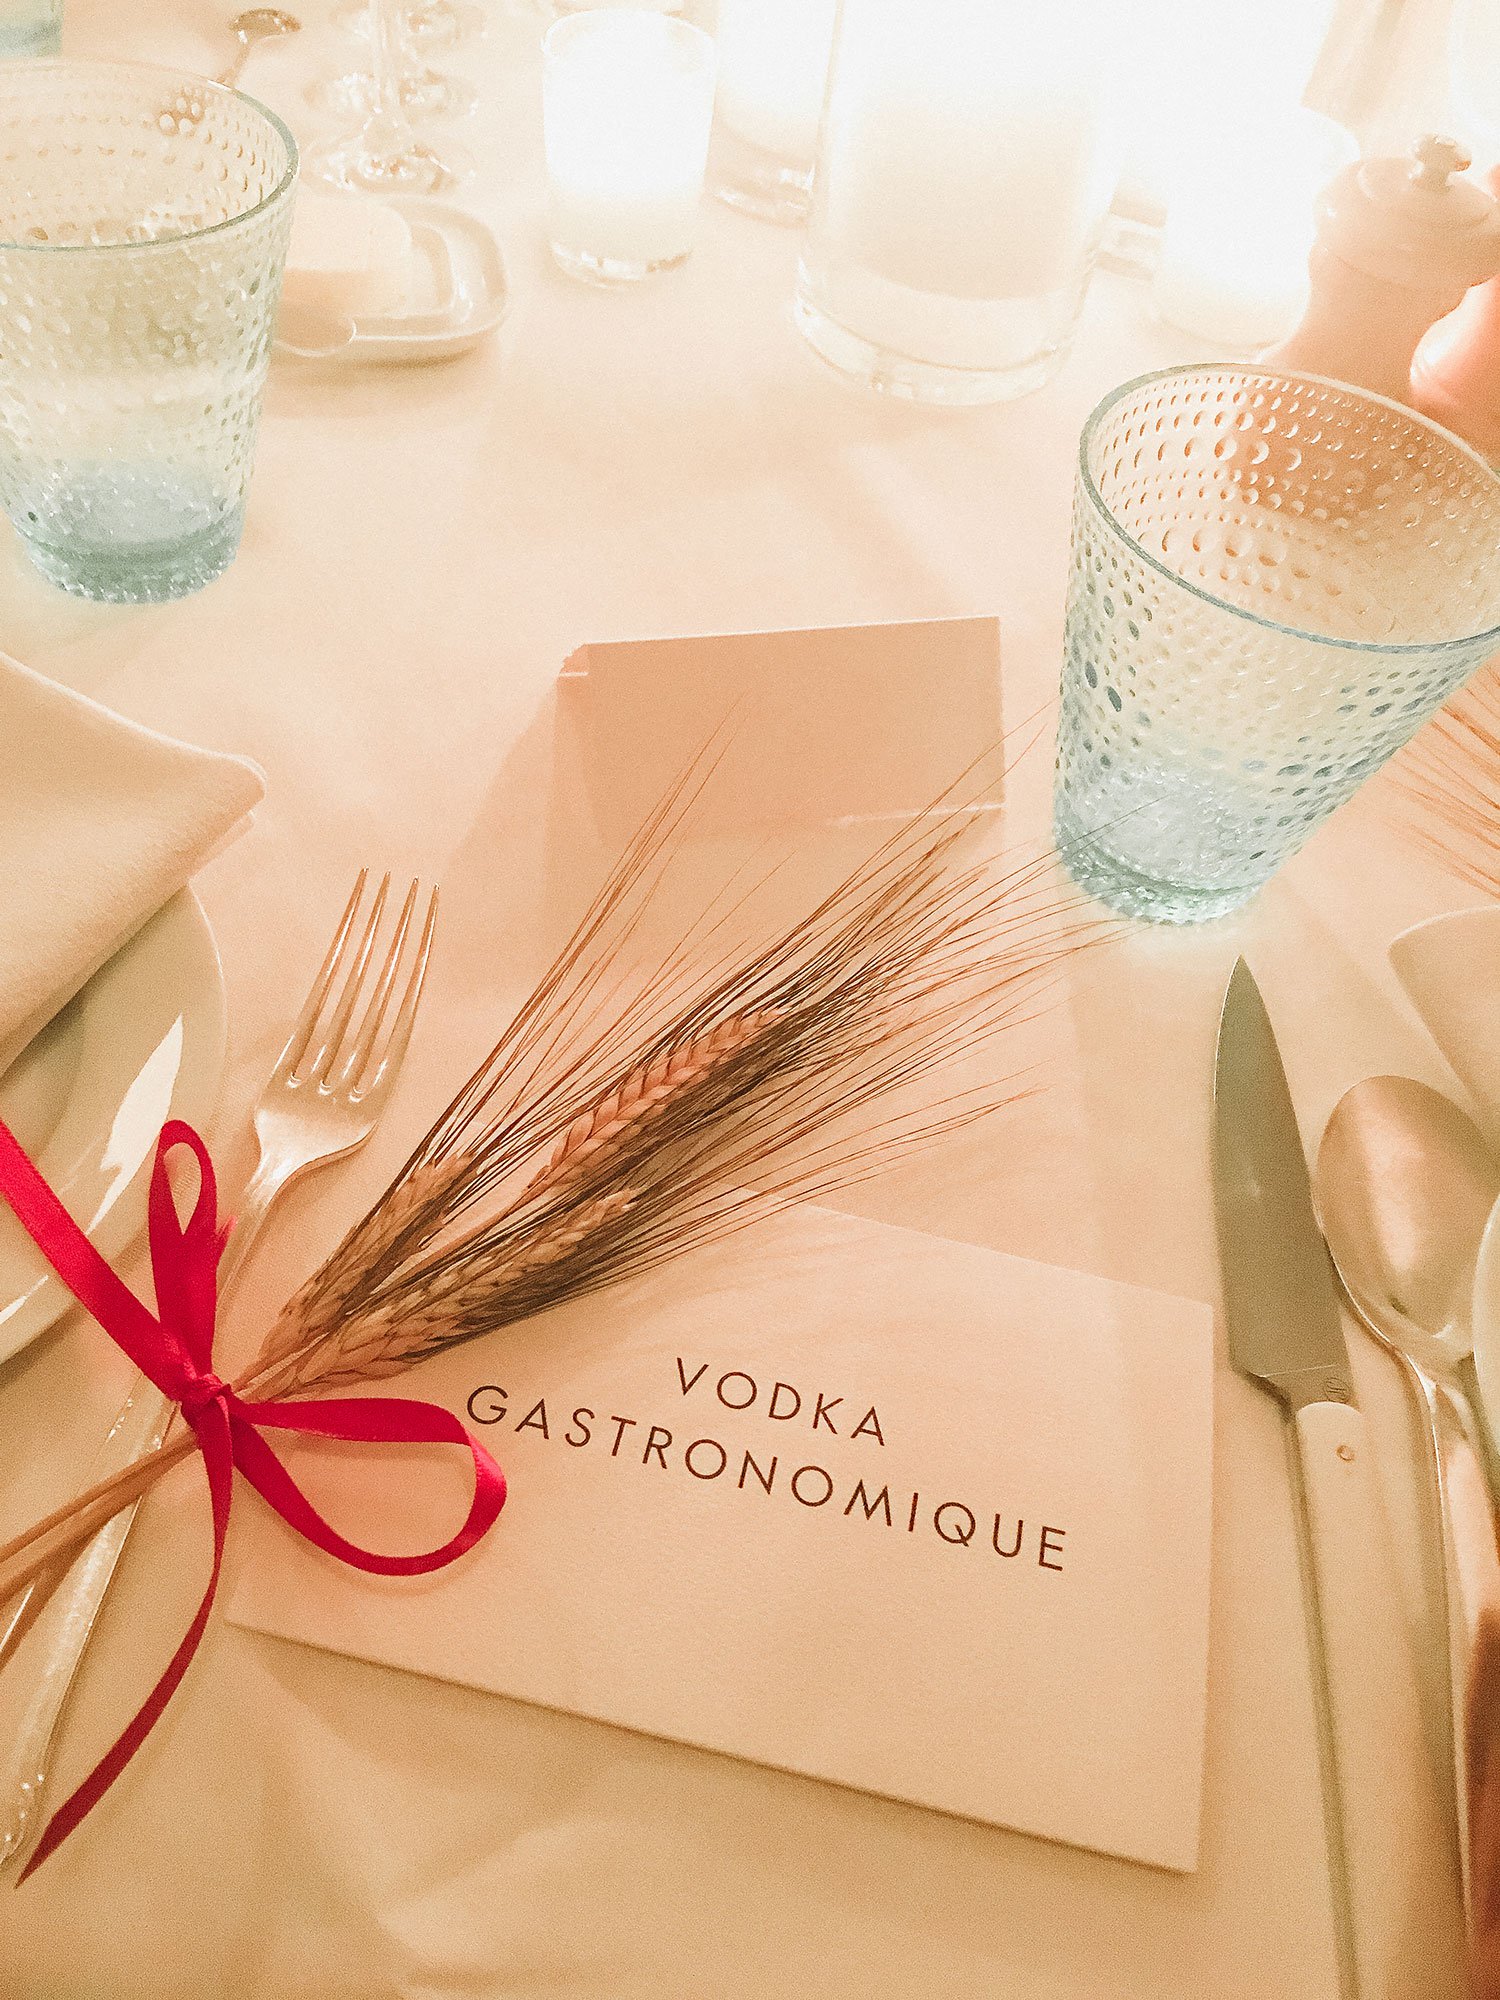 Benoit NYC Grey Goose Vodka Gastronomique with 3 michelin-starred Chef Alain Ducasse